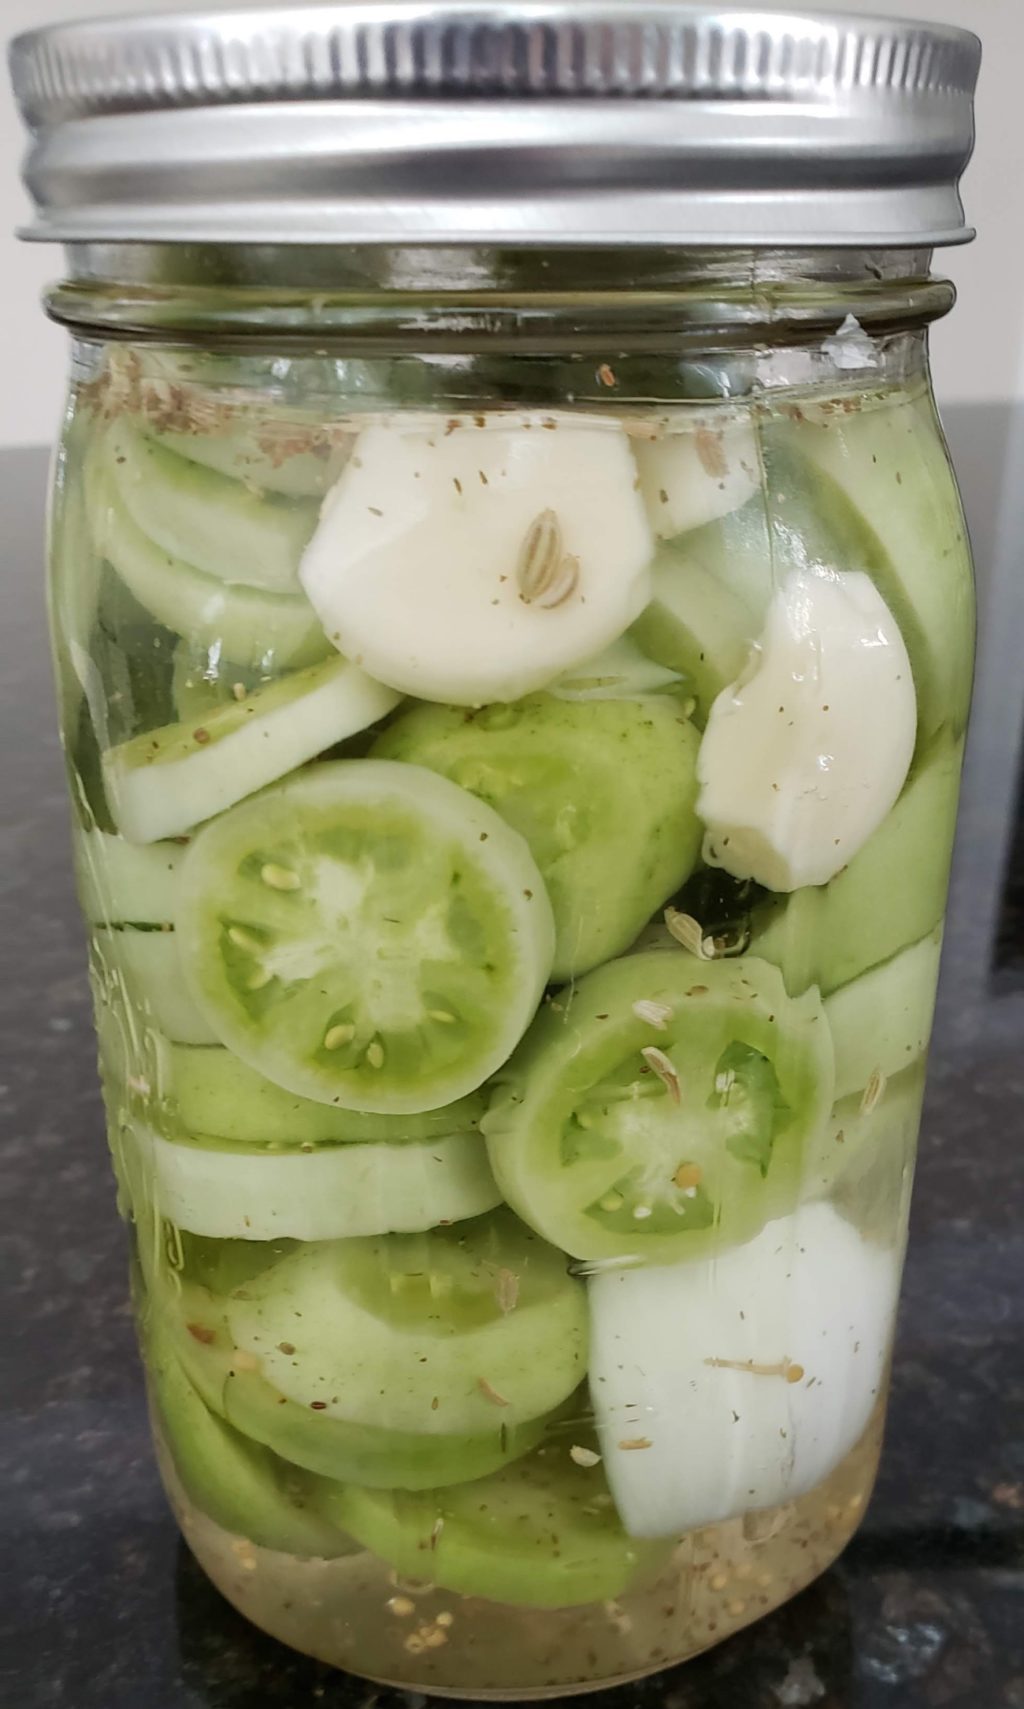 Pickled Green Tomatoes Love Of Food Magazine,Melting Chocolate Chips With Coconut Oil